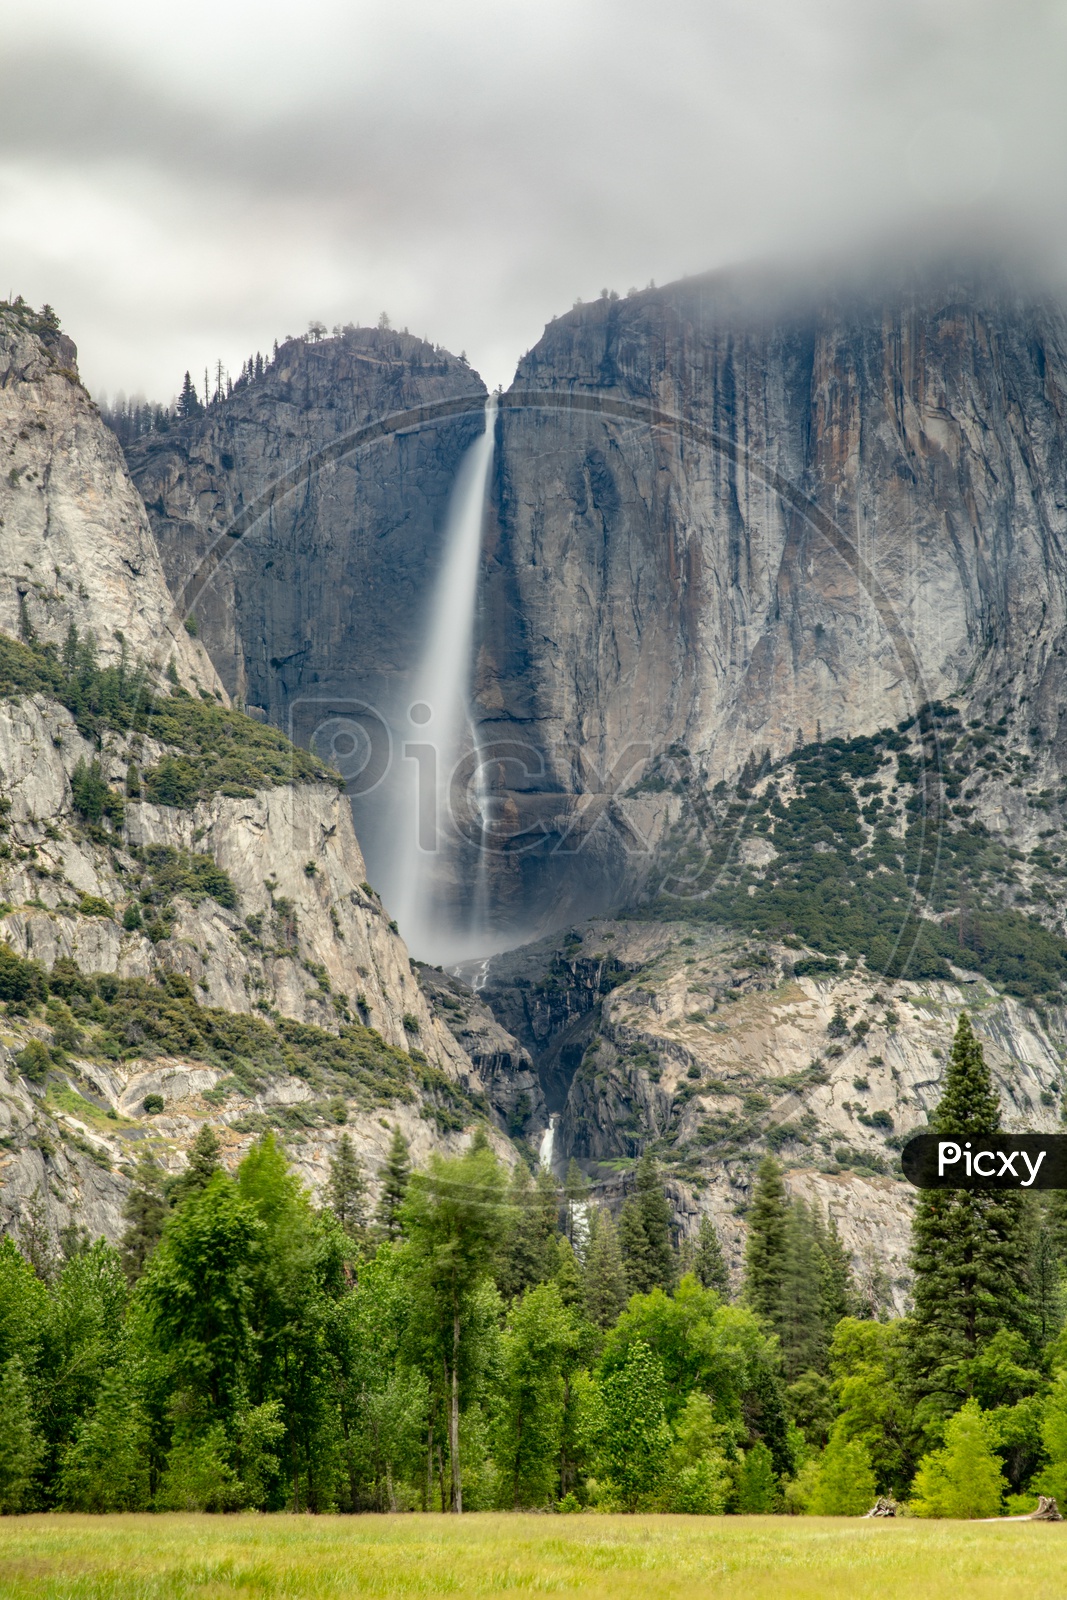 A Beautiful Water Falls Falling From The Mountains in Yosemite Valley